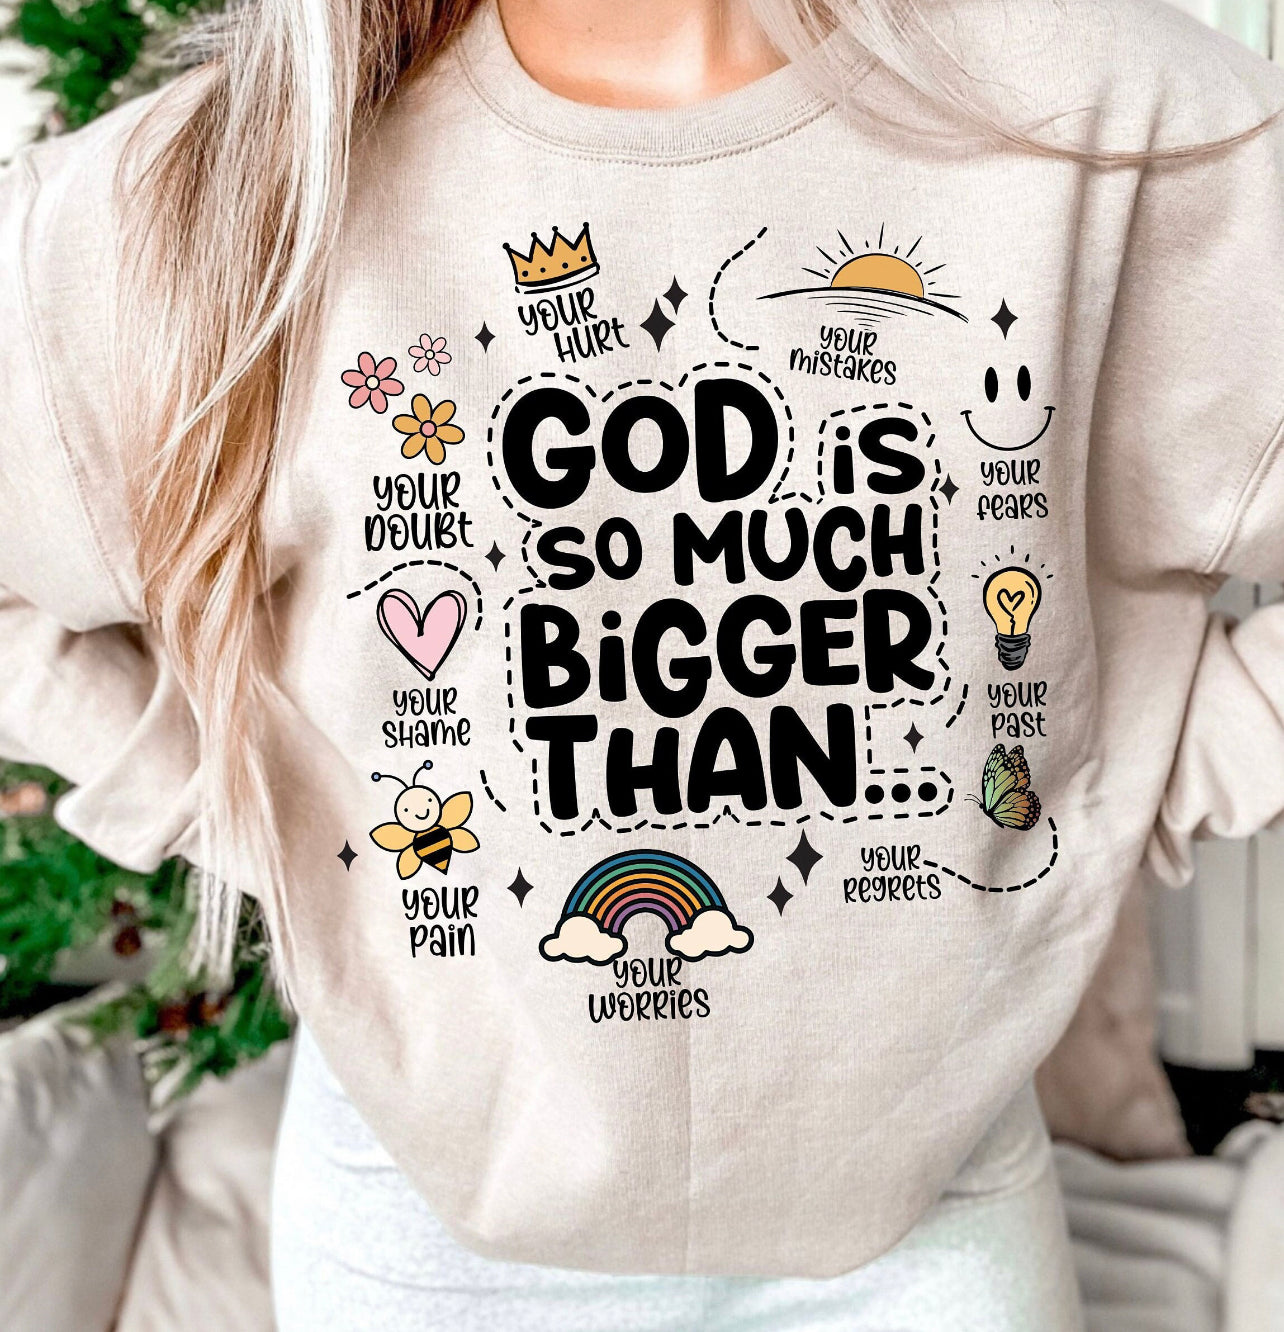 God is much bigger